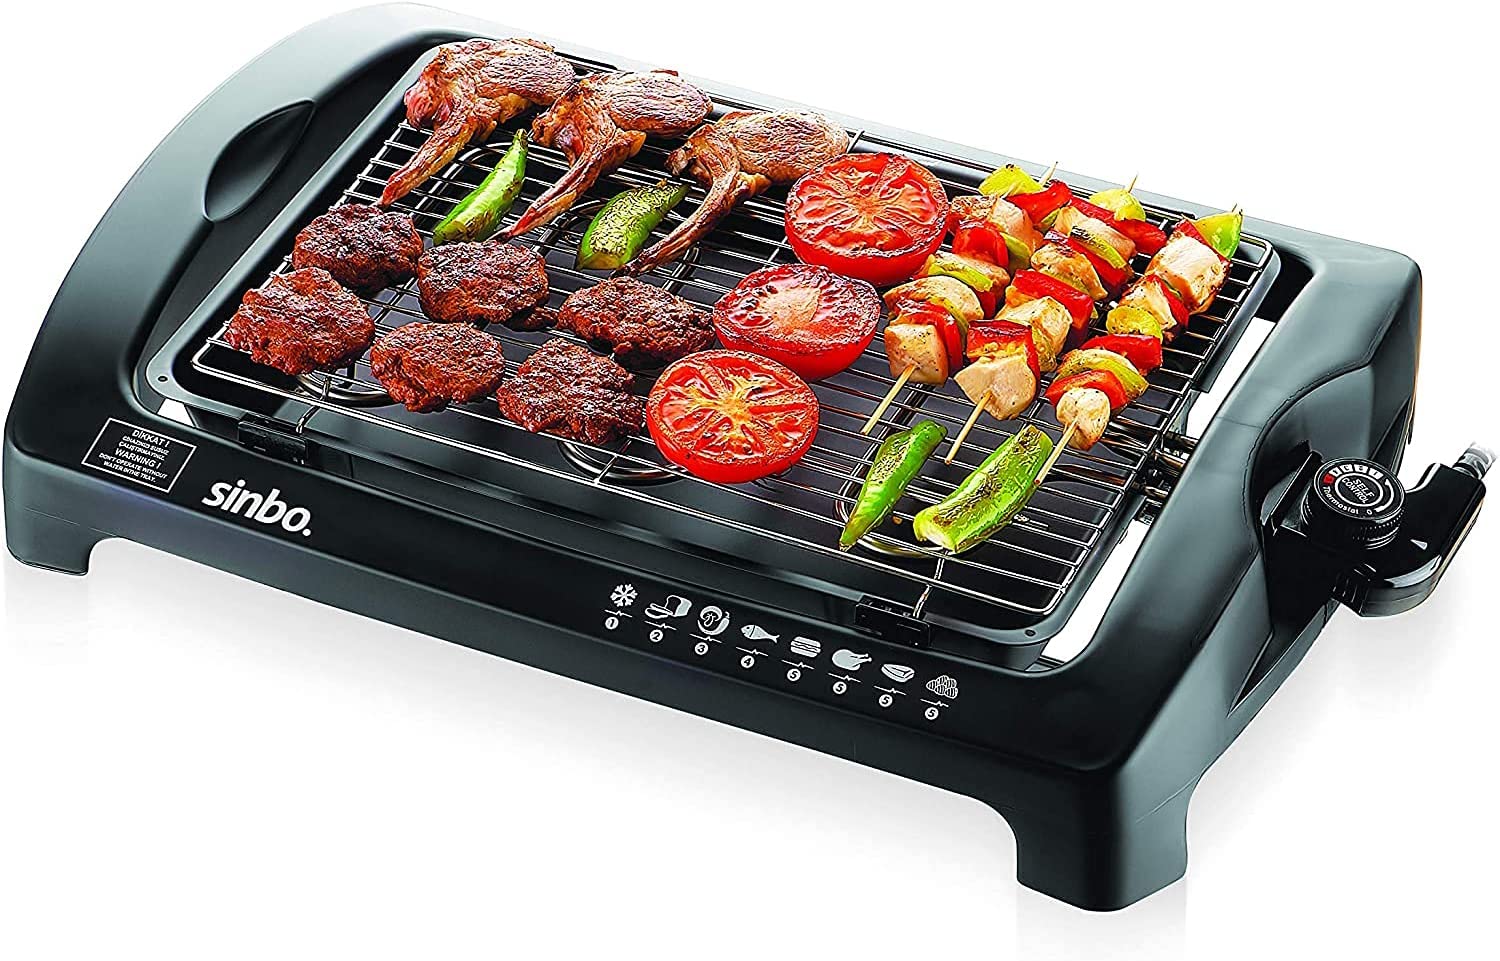 Livemore BBQ Barbeque Electric Grill, Cool-Touch Electric Barbecue, Balcony Table Grill